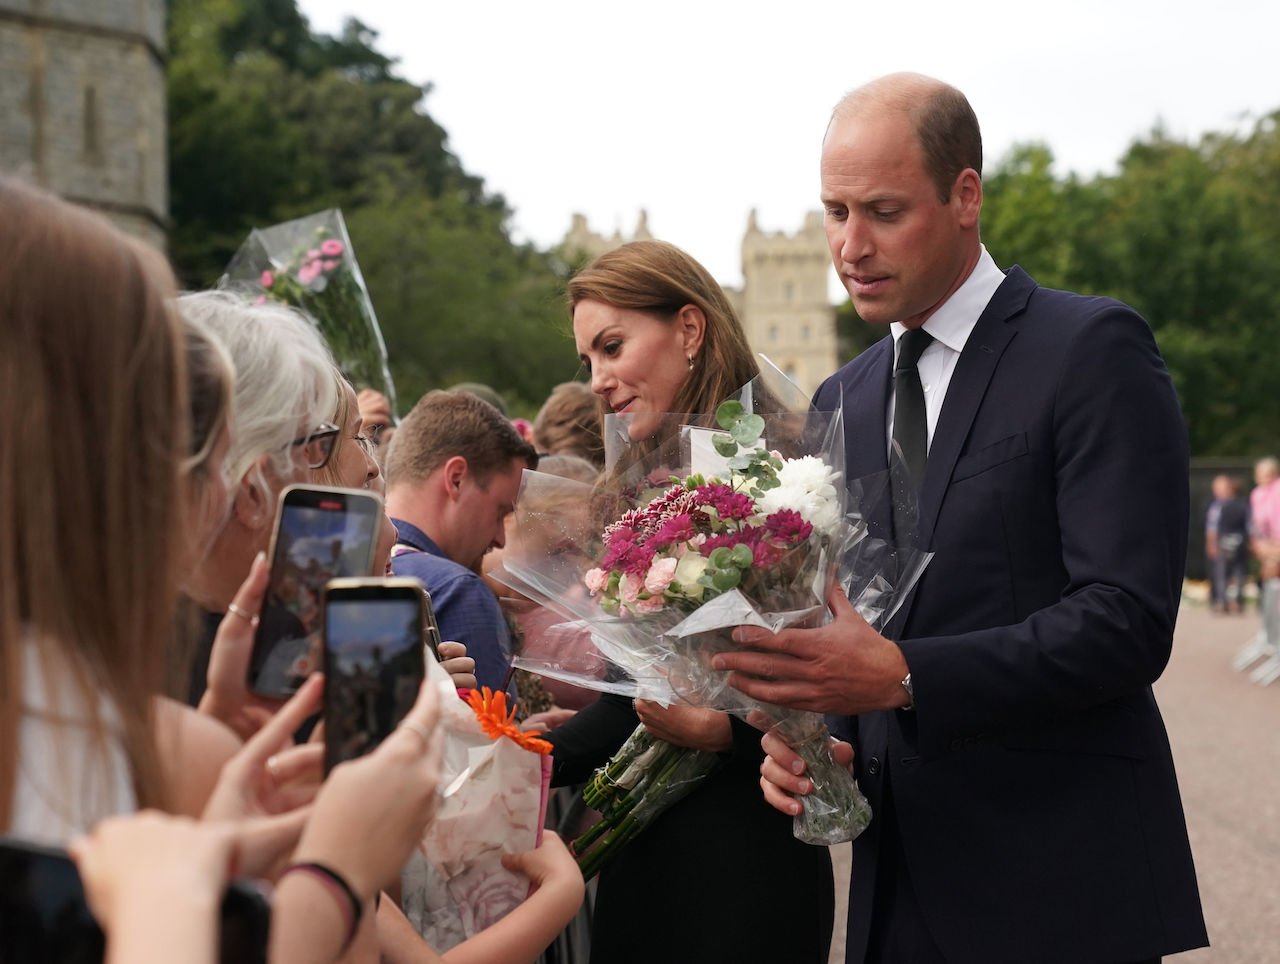 Kate Middleton Has Helped Prince William ‘Embrace His Compassionate Side,’ Body Language Expert Says